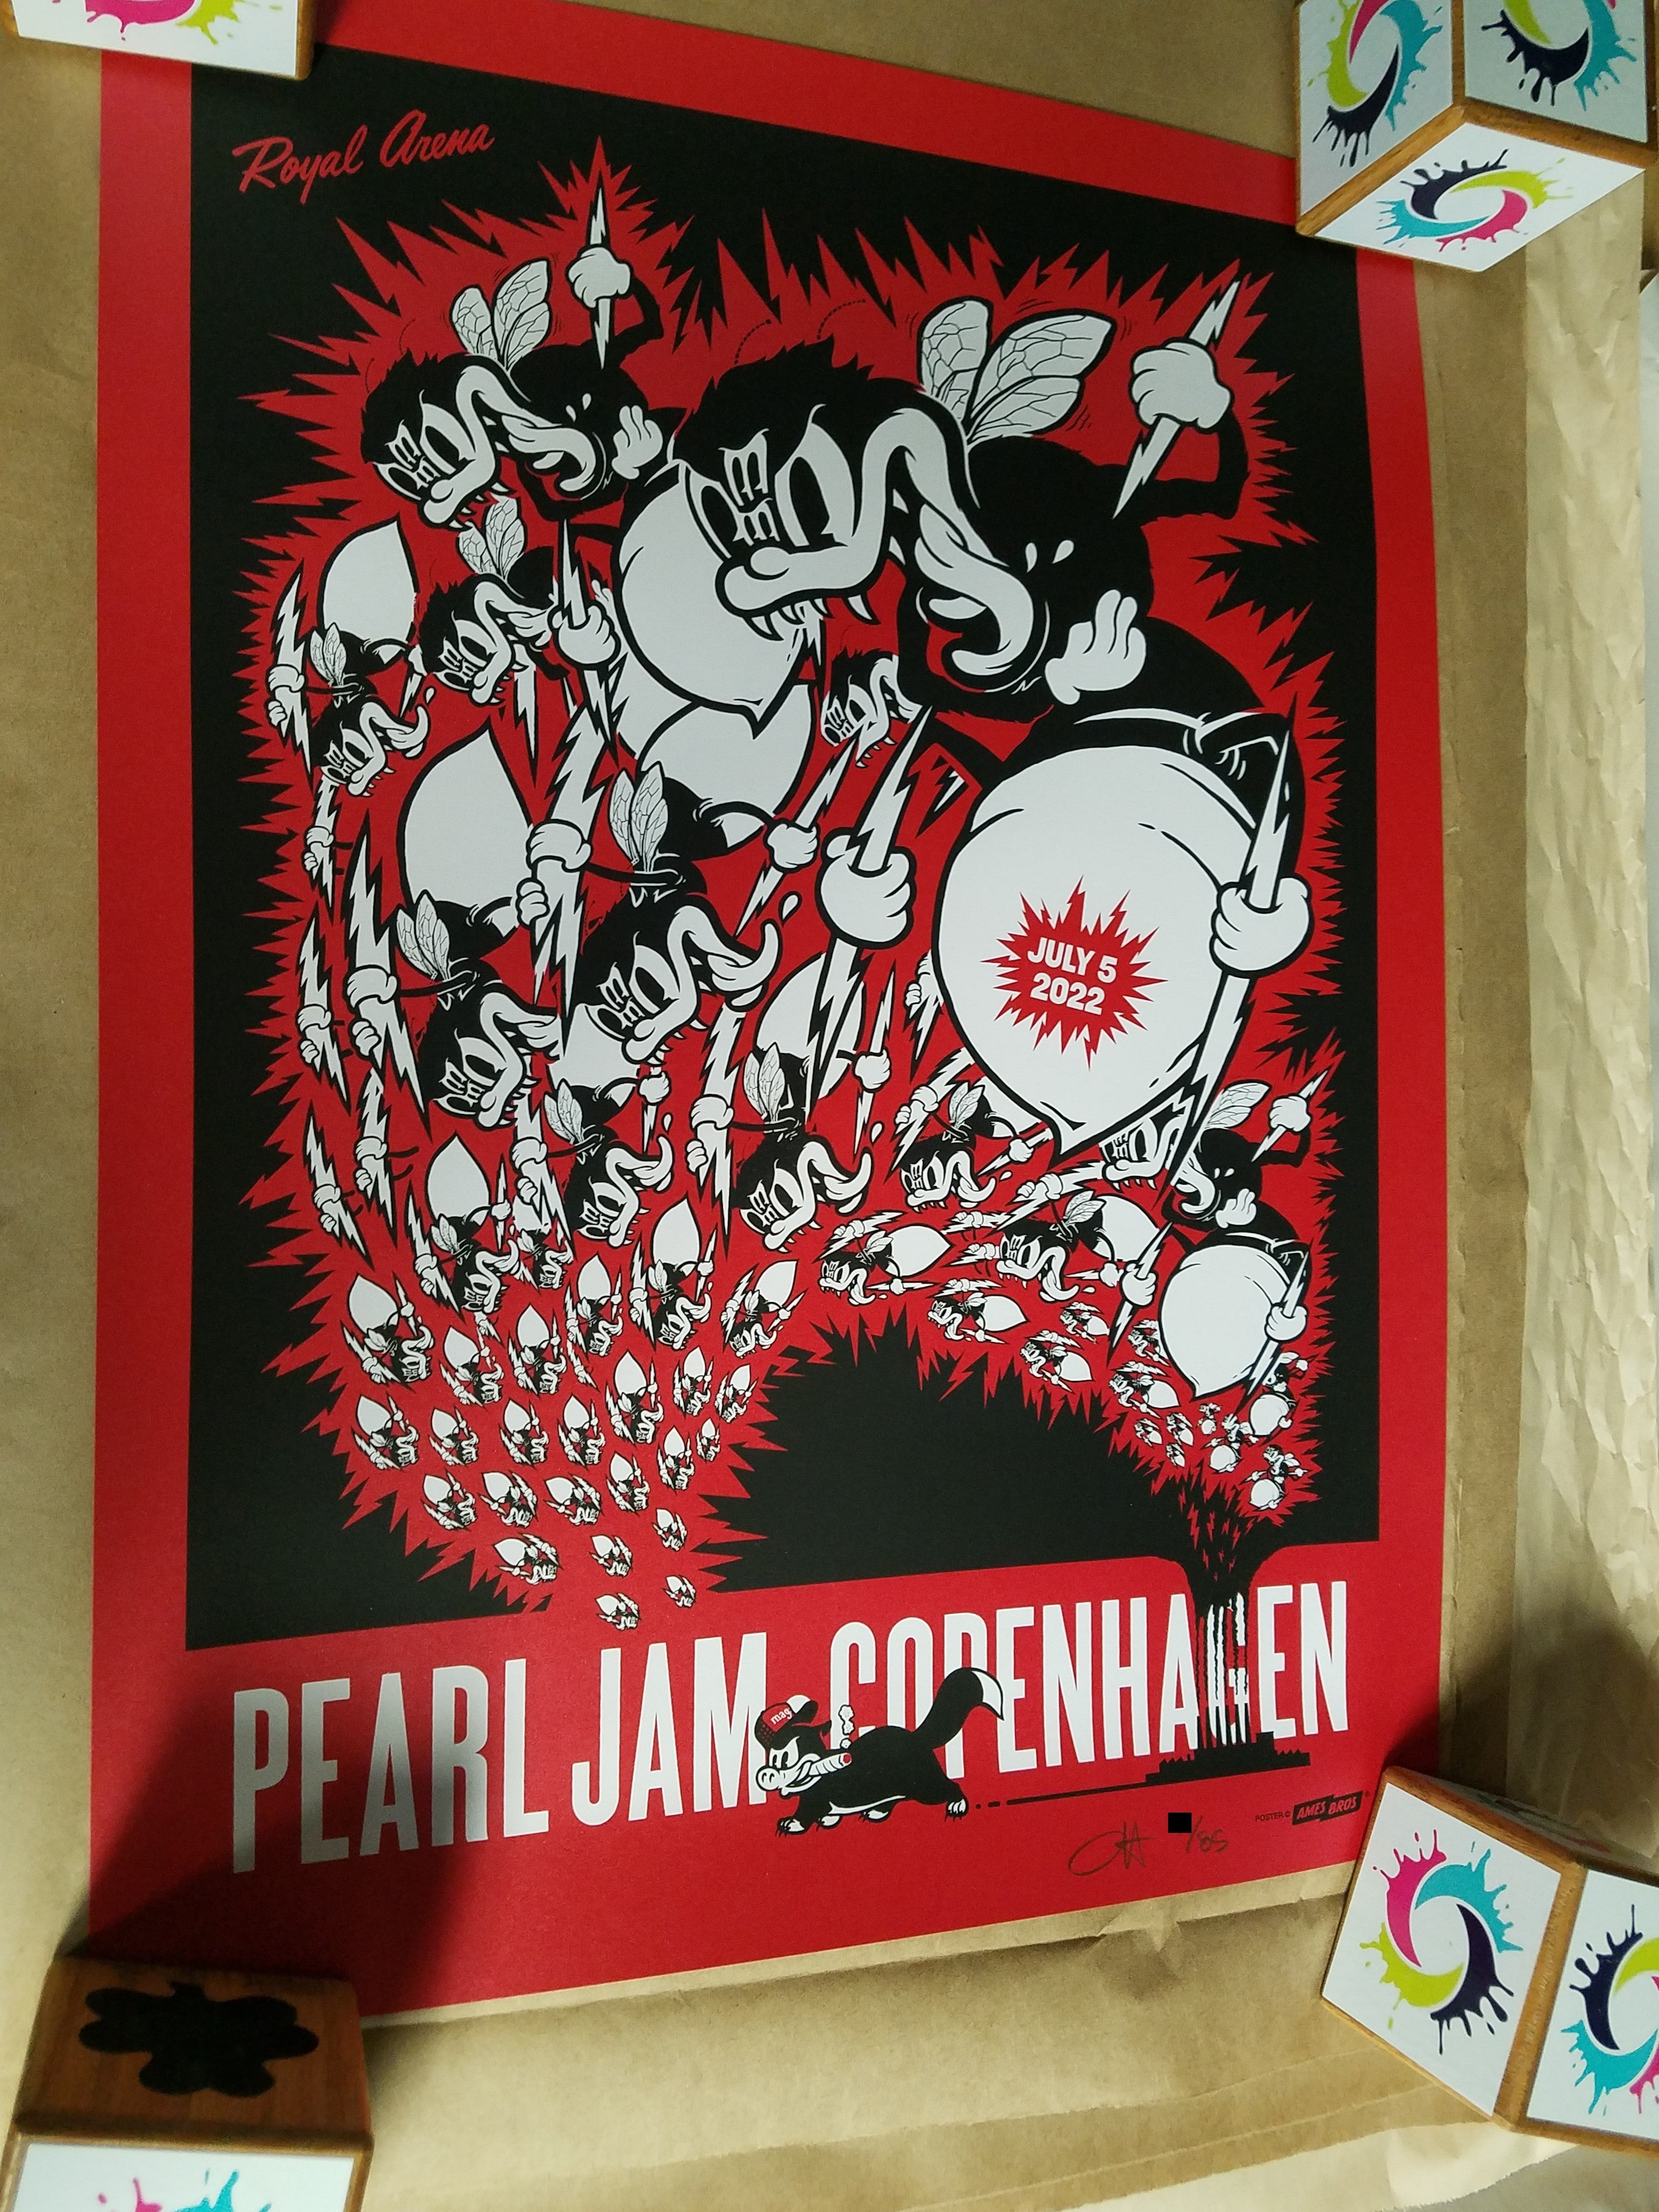 Title:  Official Pearl Jam Copenhagen 2022 (Red Metallic Variant)  Artist:  Ames Bros  Edition:  Red Metallic Variant xx/85, signed and numbered by the artist  Type: 2 Color silkscreen poster on red metallic paper  Size: 18" x 24"  Location:  Copenhagen, Denmark  Venue:  Royal Arena